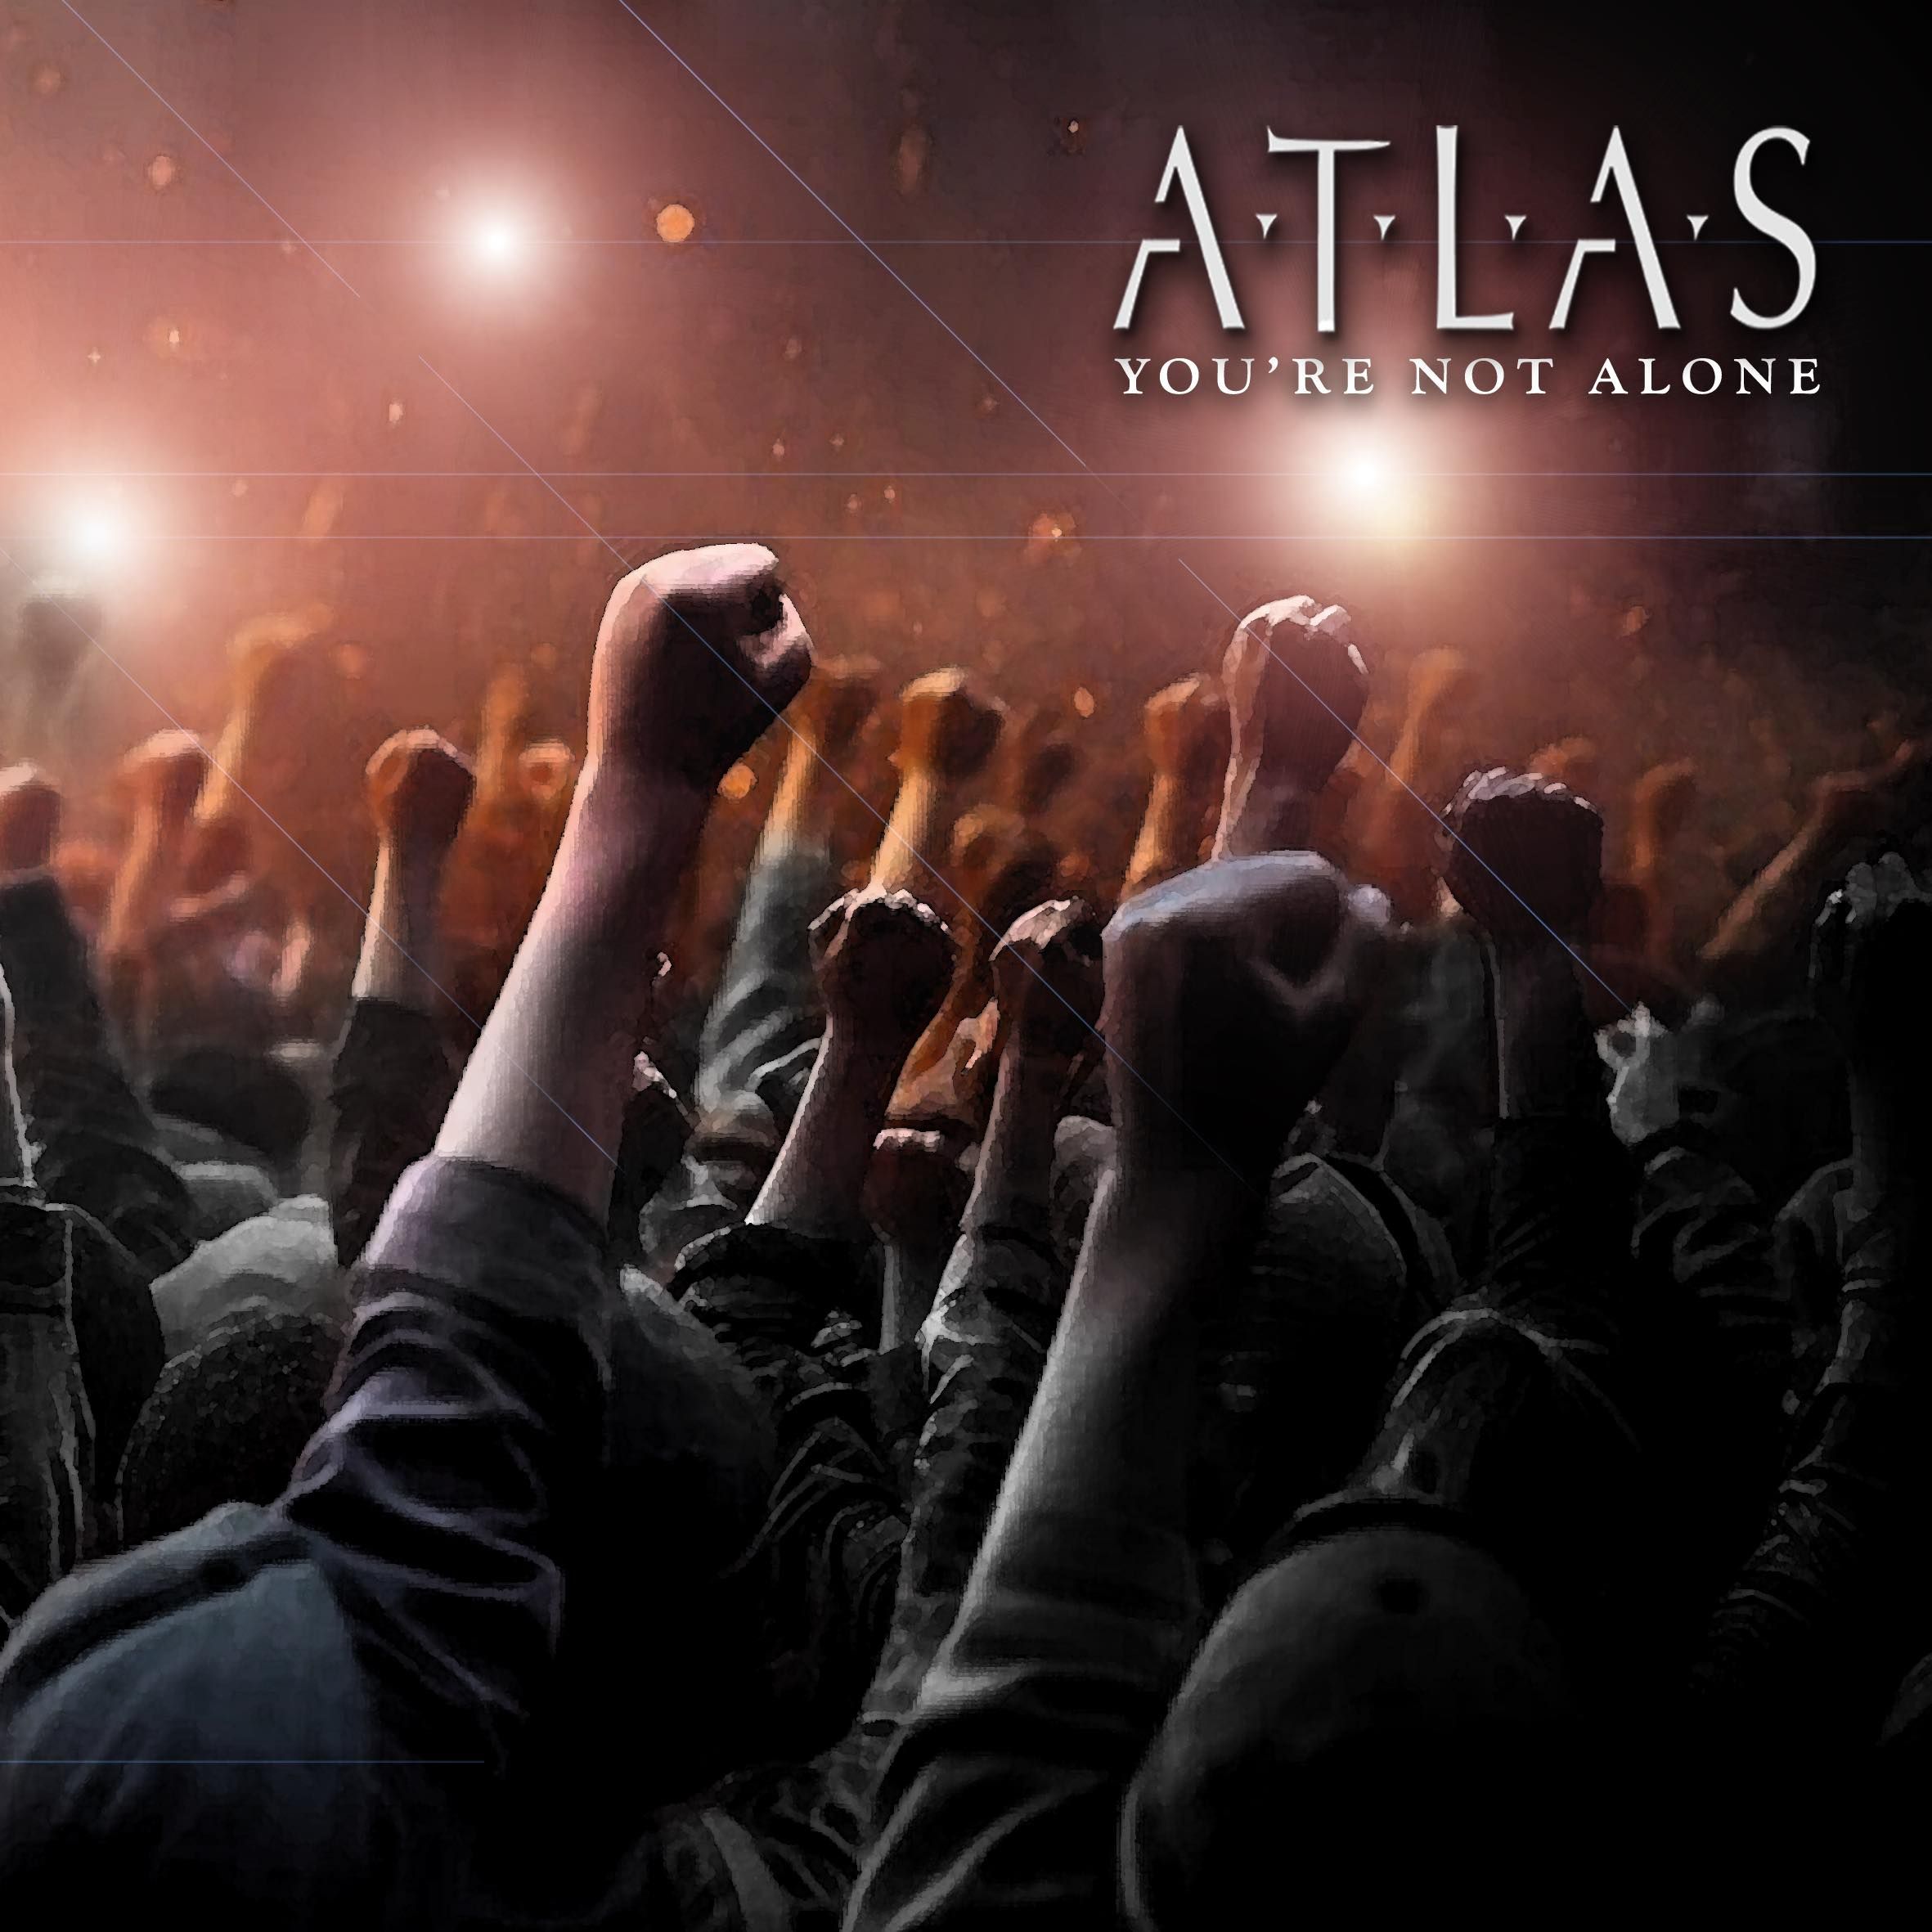 ATLAS Let Fans Know “You Are Not Alone”